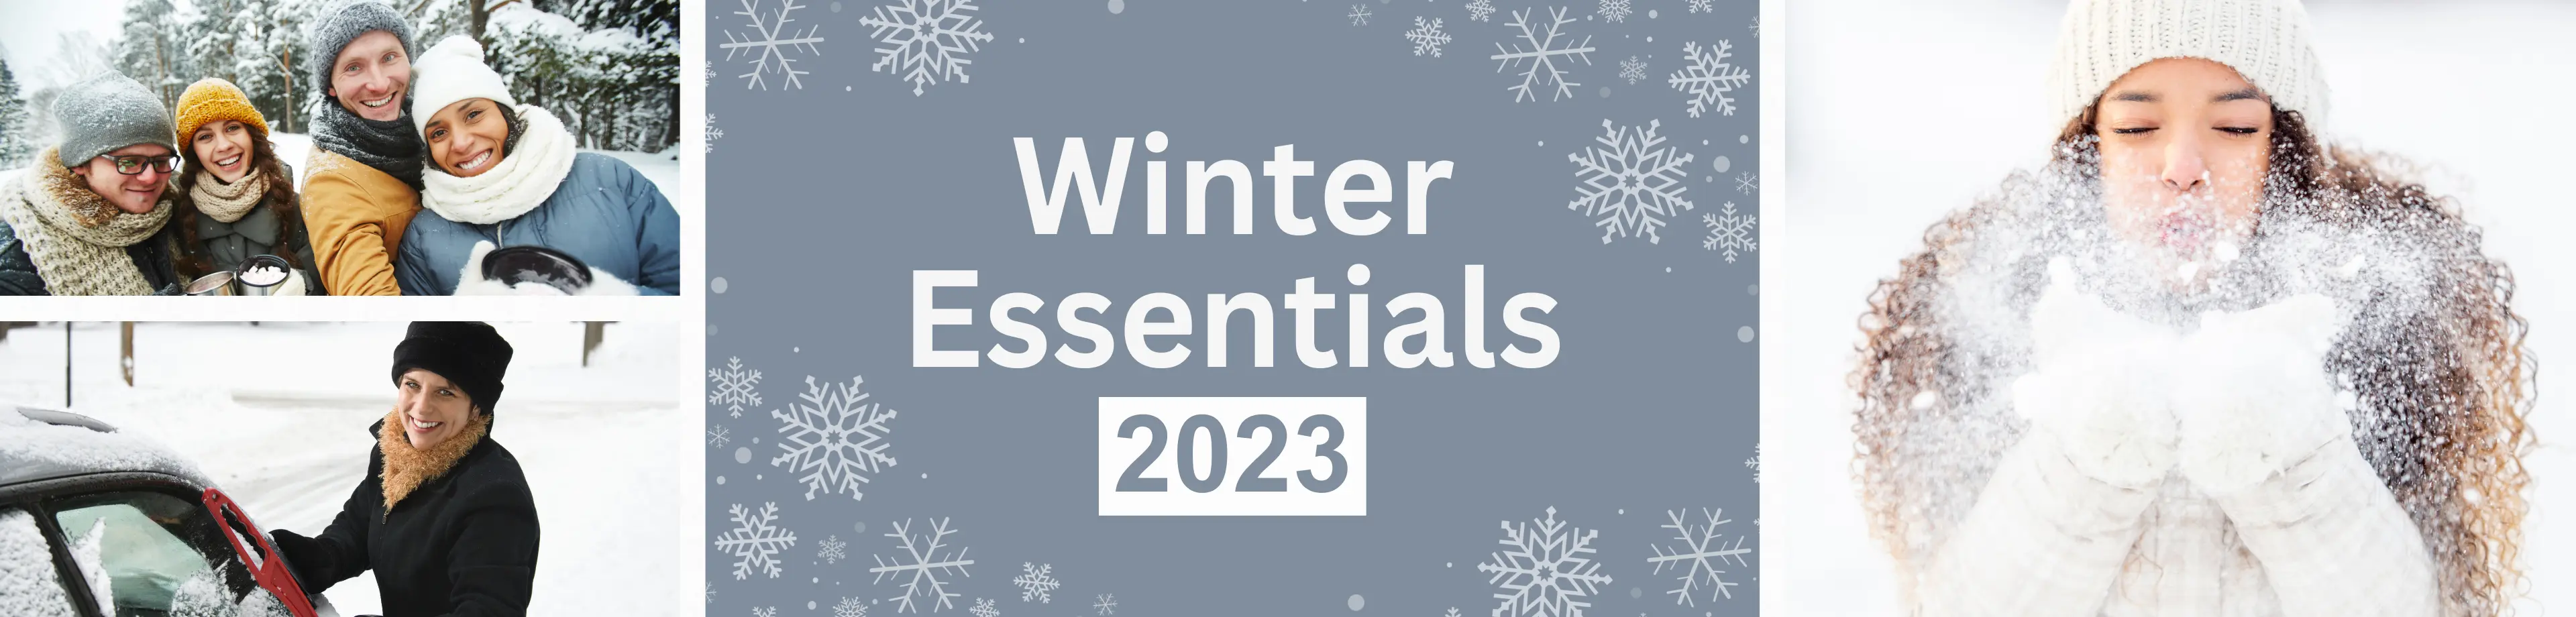 Custom Branded Winter Essentials - Essential swag and customized business gifts for Winter in Canada!